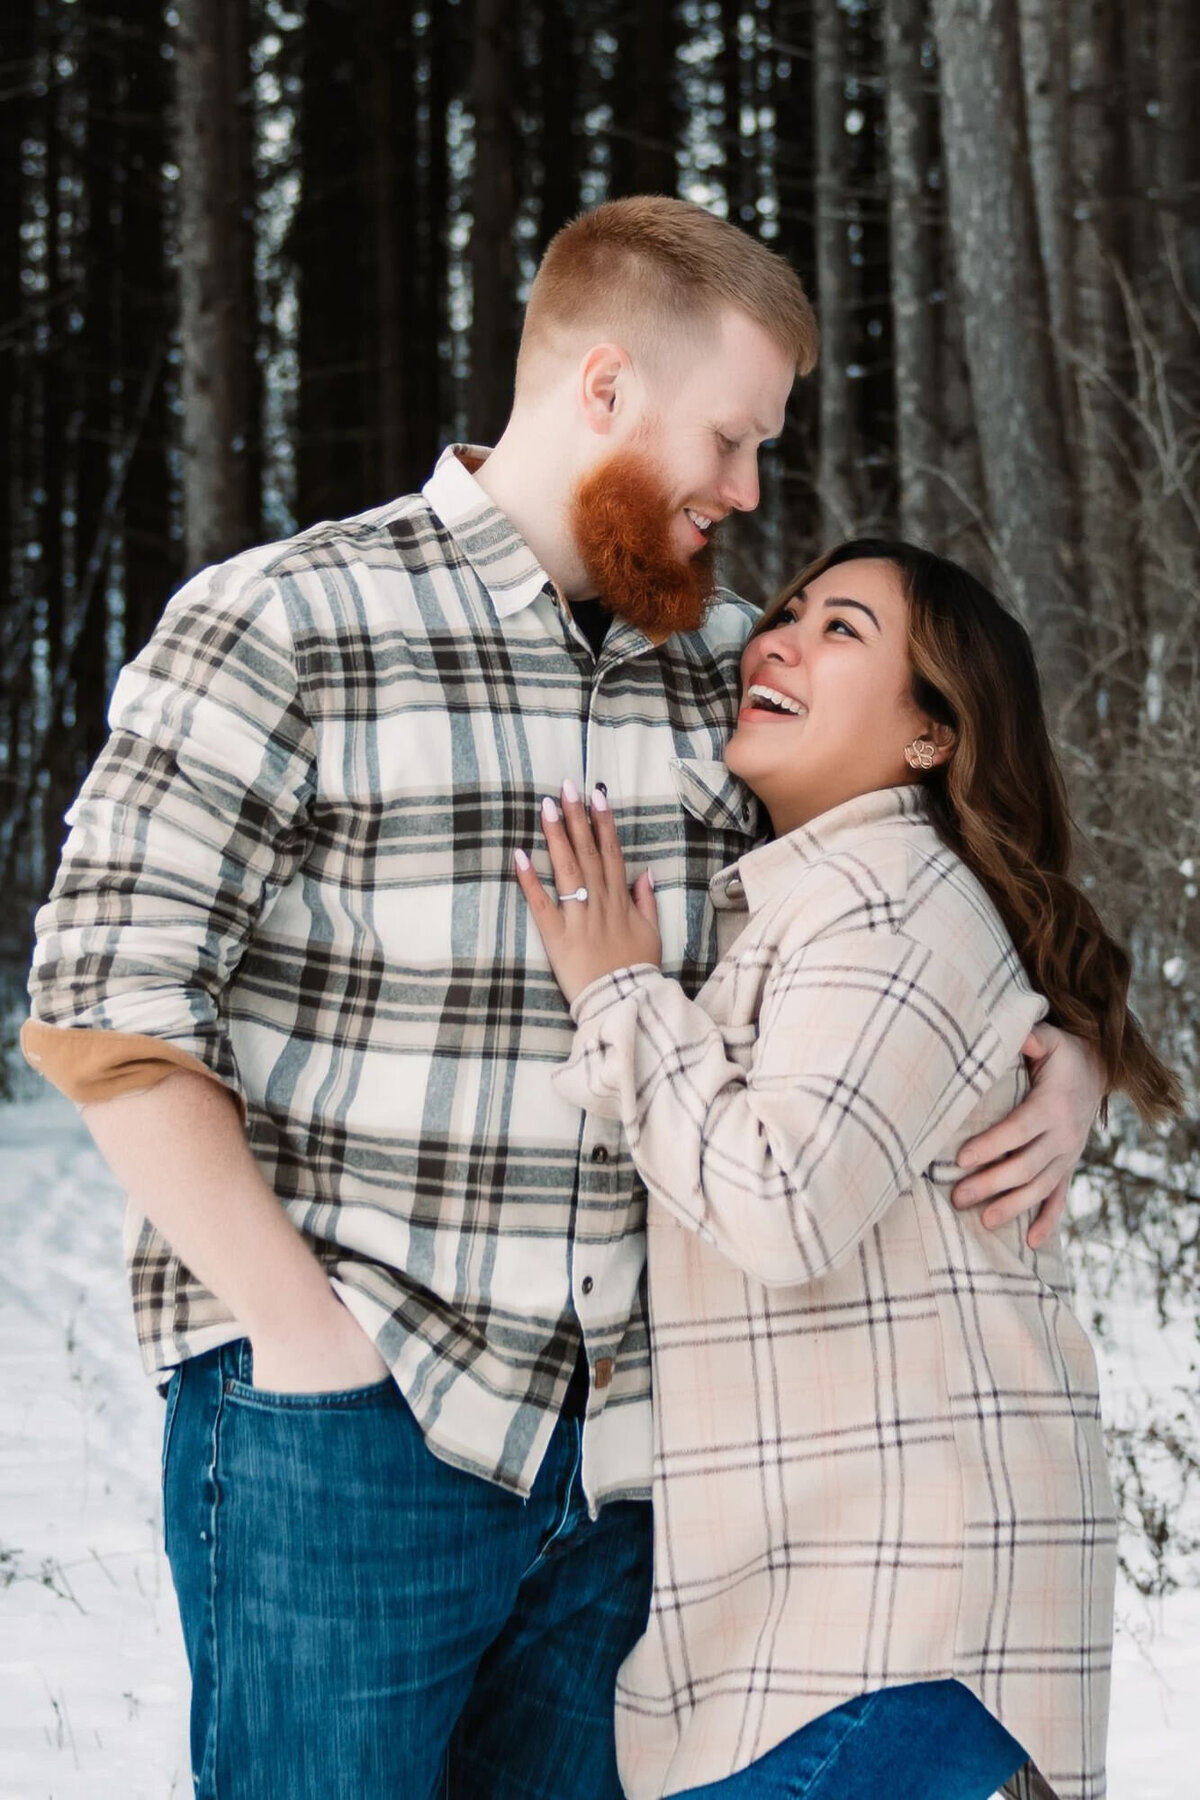 mand and woman snuggled up in the snowy forest while wearing plaid and laughing